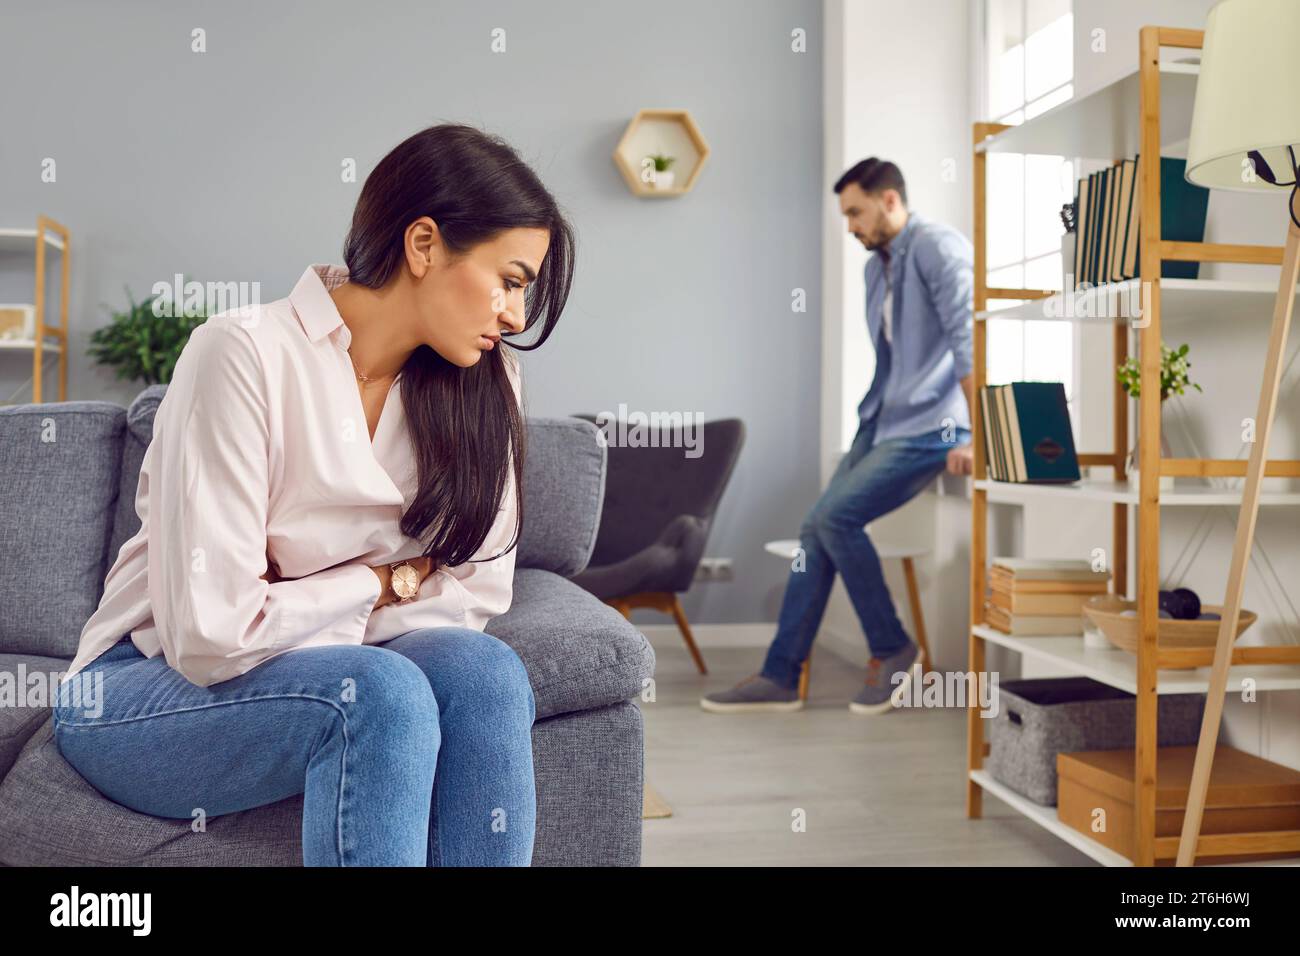 Upset young woman sitting on sofa and a man in background at home. Quarrel and divorce concept. Stock Photo